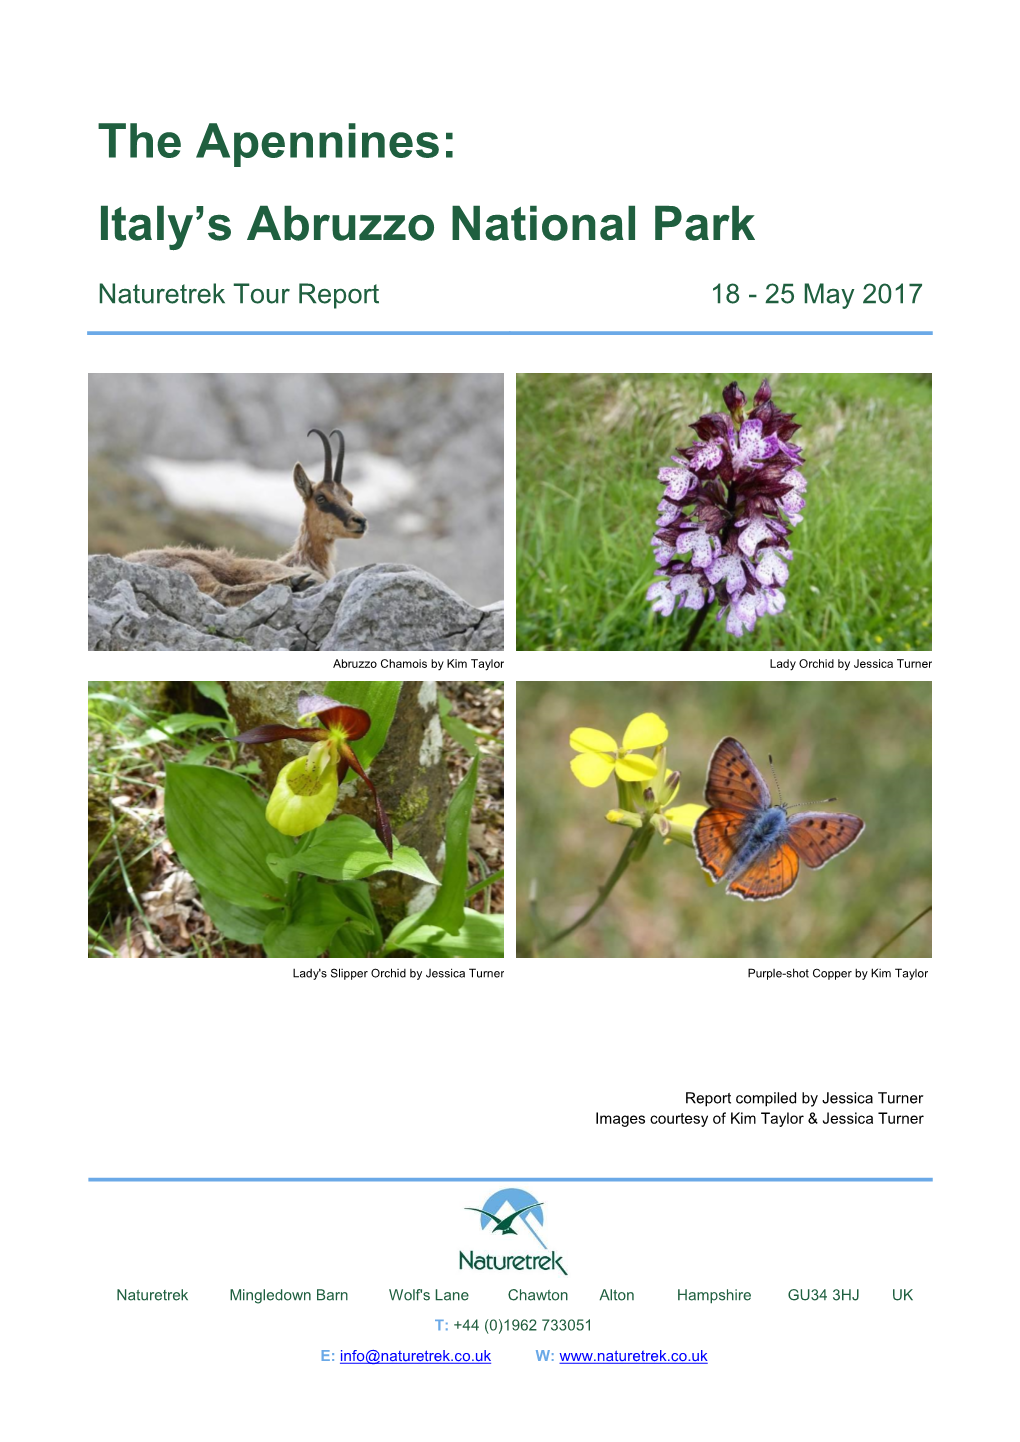 The Apennines: Italy's Abruzzo National Park